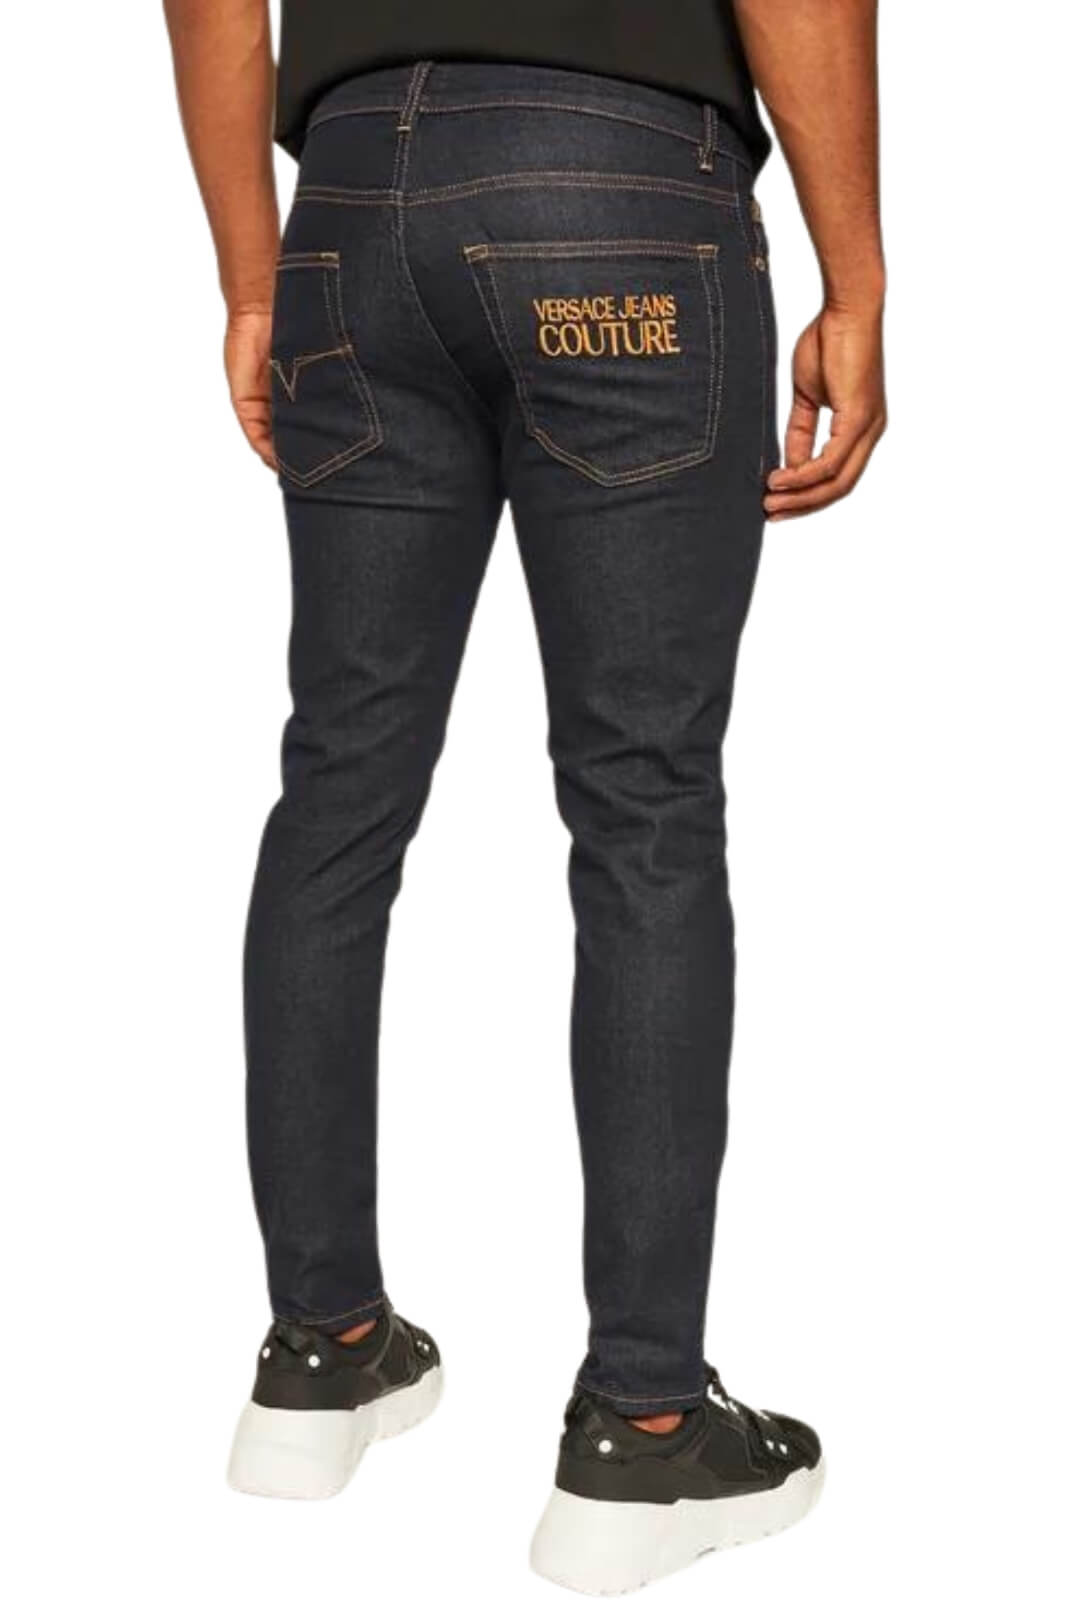 Versace Jeans Couture Jeans Uomo SKINNY LONDON